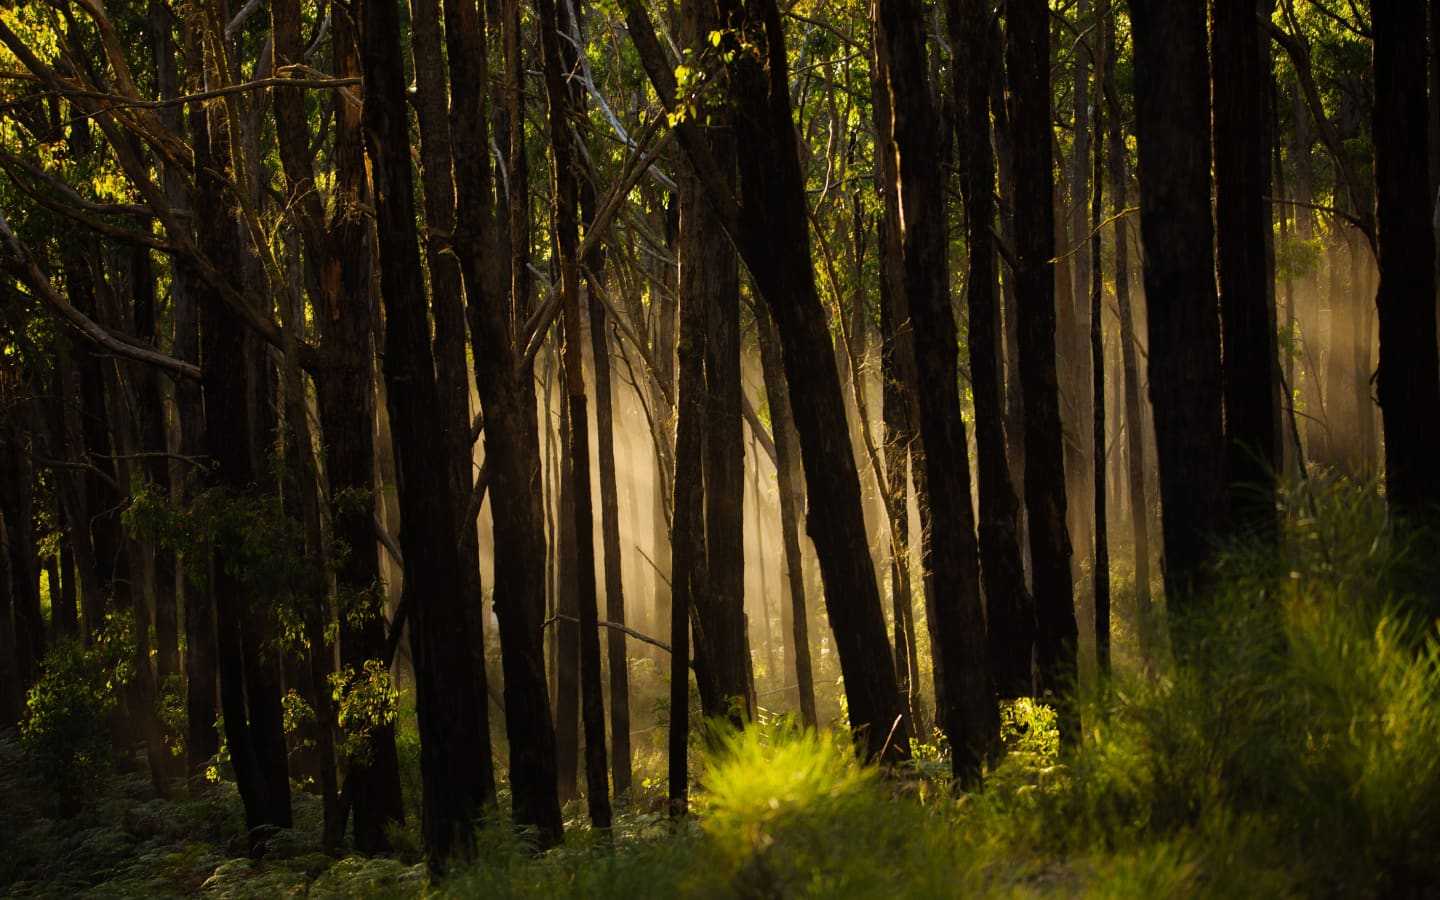 The light burning through mist in the forest during the early morning in Victoria, Australia.